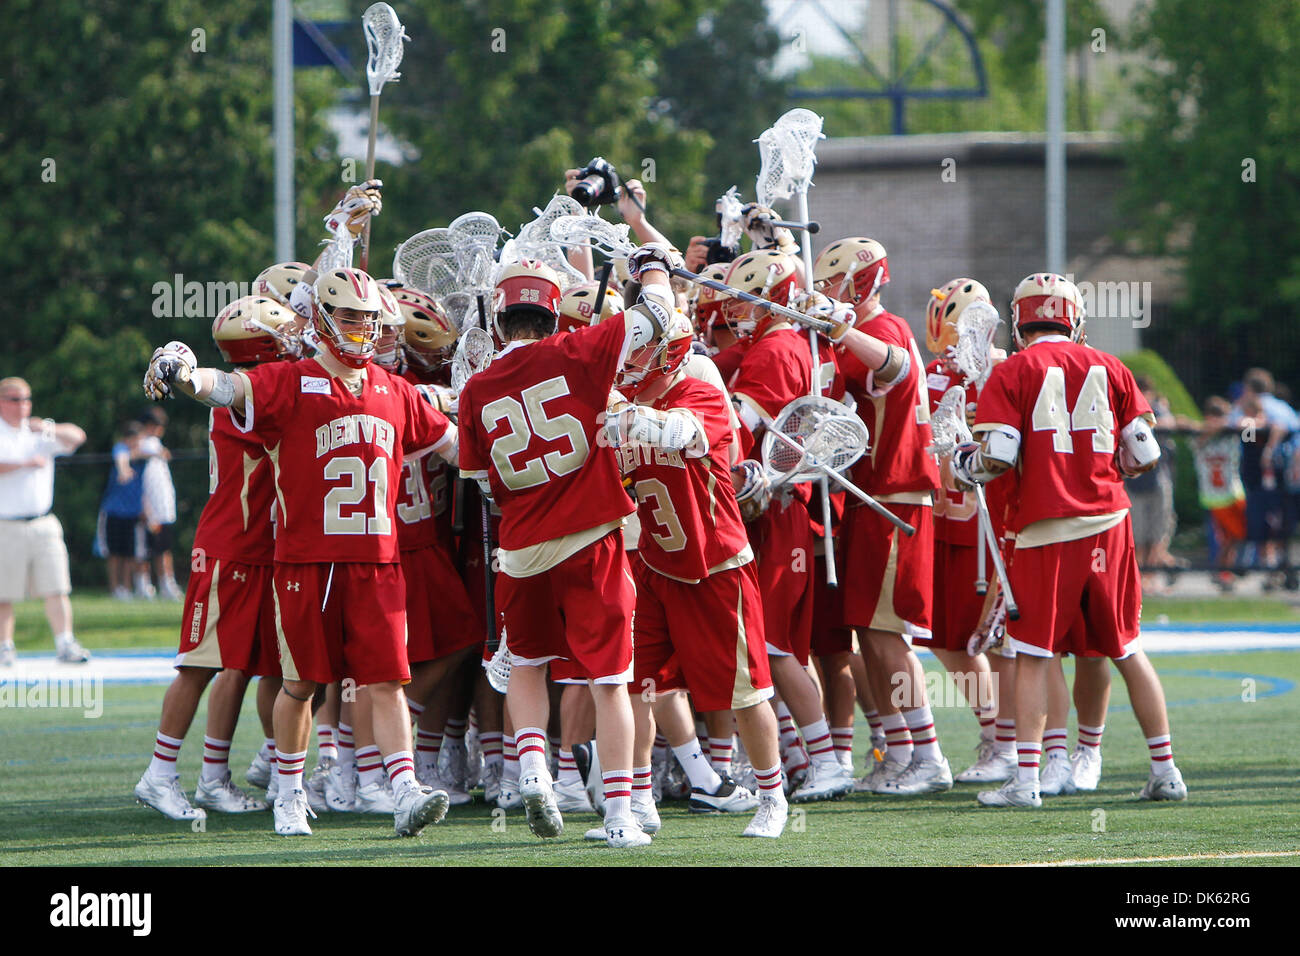 May 21, 2011 - Hempstead, New York, U.S - The Denver Pioneers celebrate their victory against the Johns Hopkins Blue Jays at the NCAA Men's Lacrosse Quarterfinals at James M. Shuart Stadium, Hempstead, NY. Denver Pioneers defeated Johns Hopkins Blue Jays 14-9. (Credit Image: © Debby Wong/Southcreek Global/ZUMAPRESS.com) Stock Photo